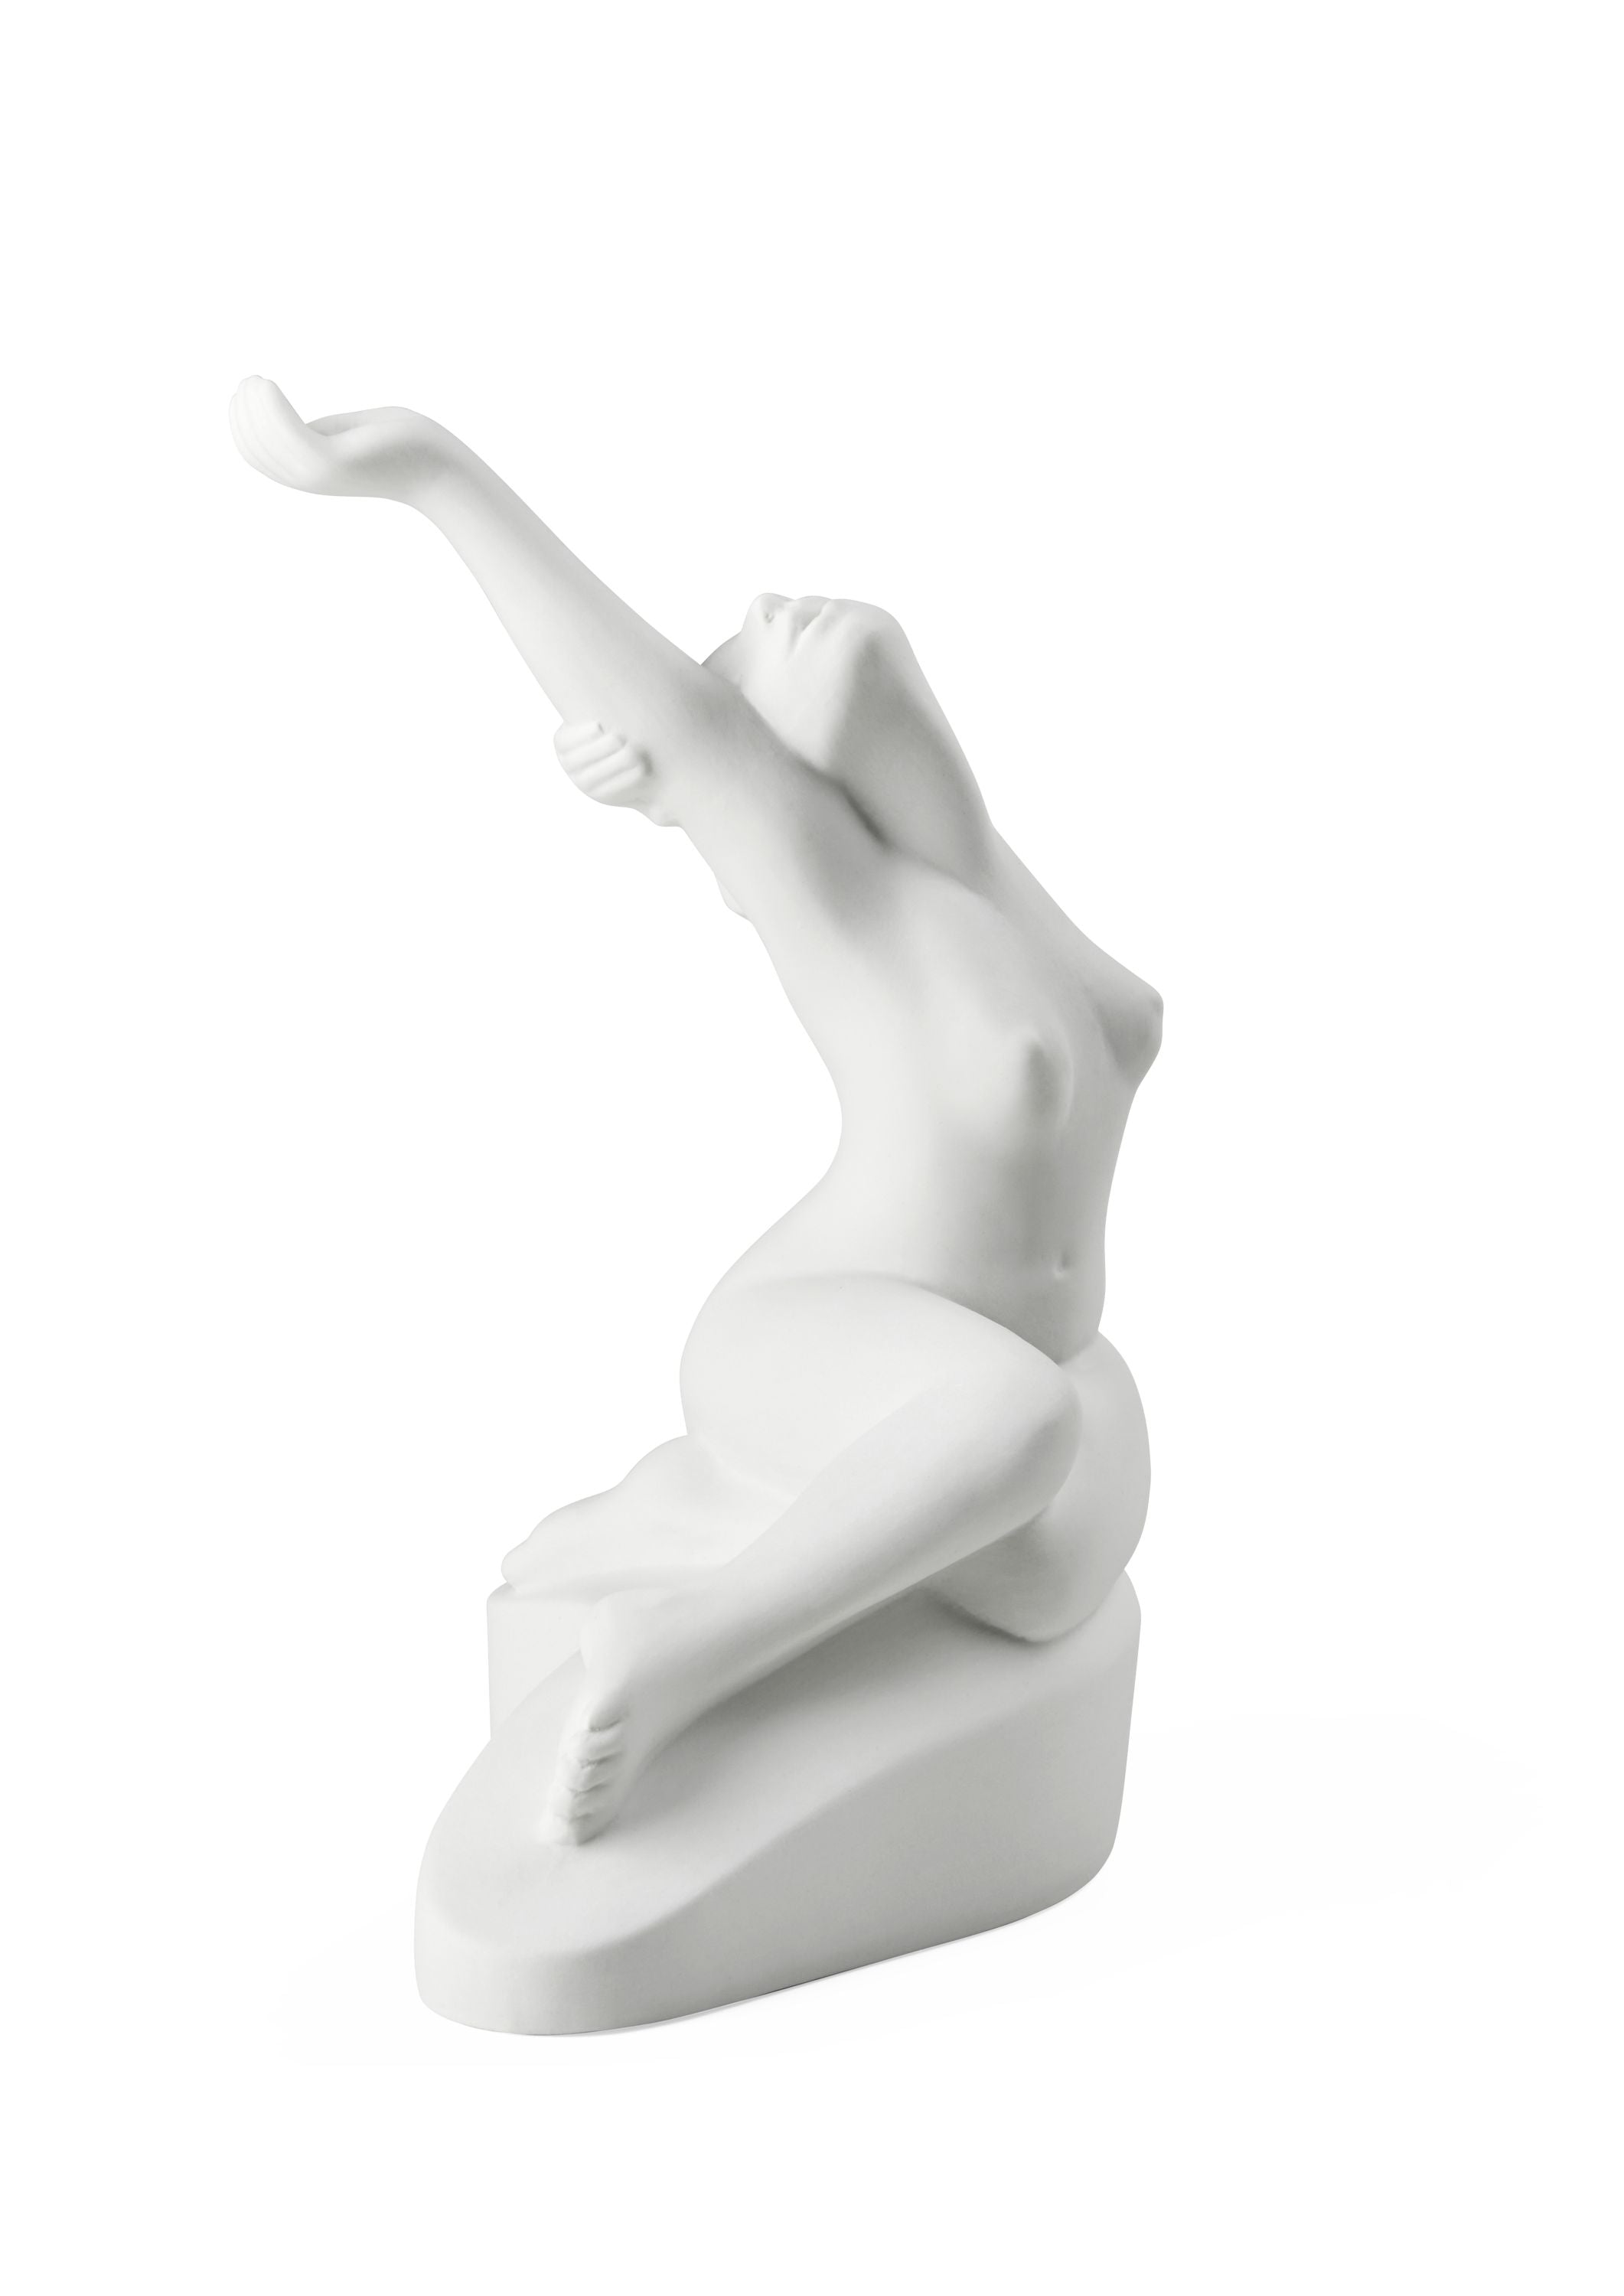 Kähler Moments Of Being Heavenly Grounded H22.5 Cm White